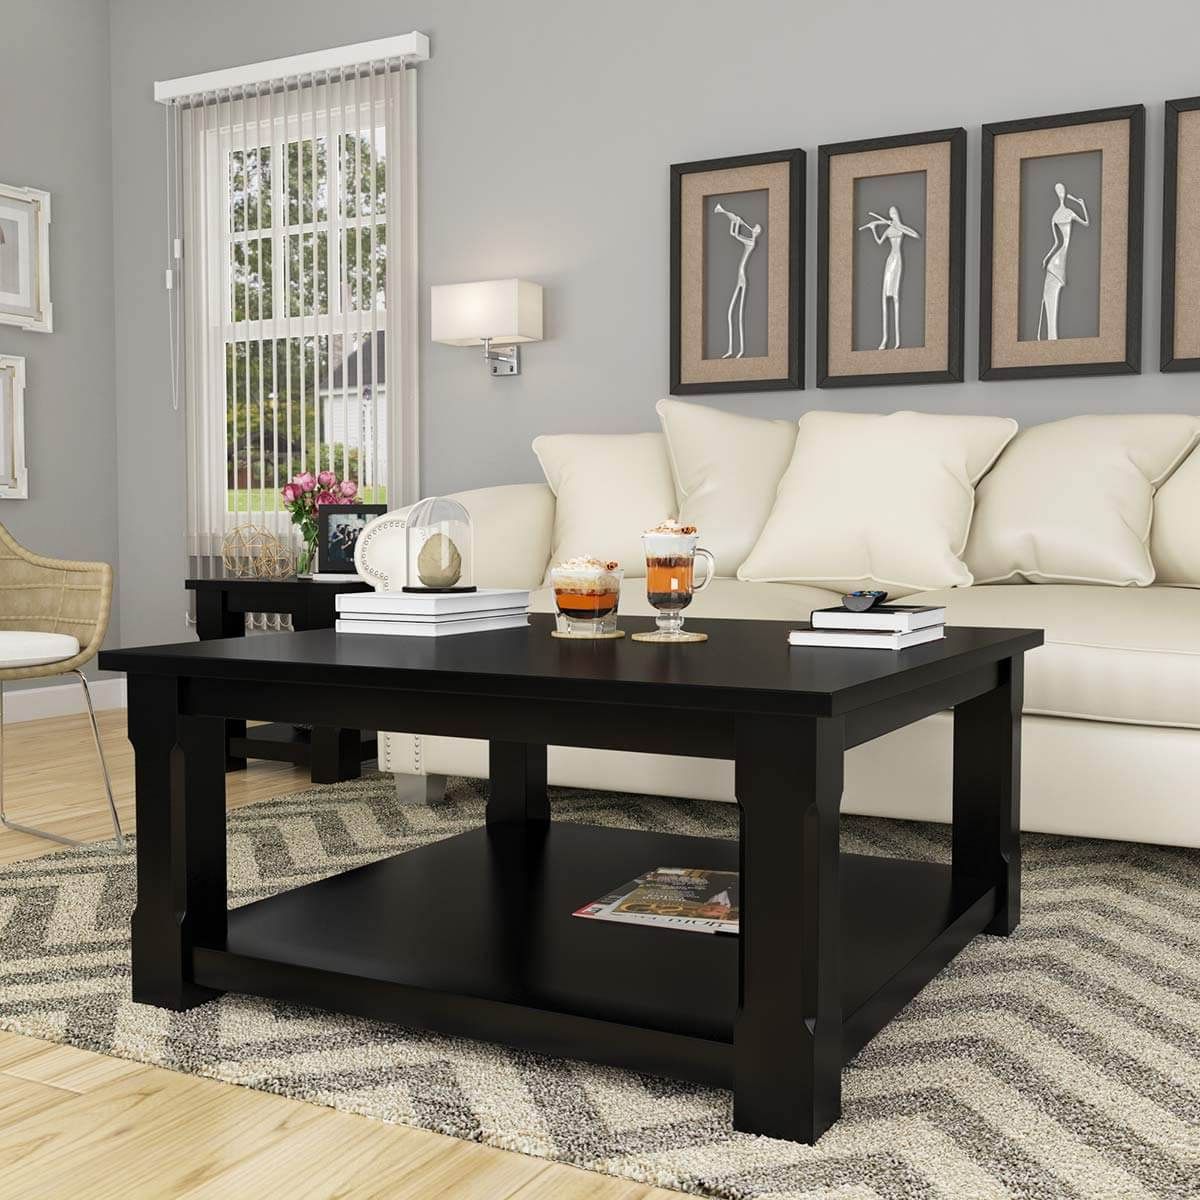 Favorite Black Wood Square Coffee Table – Brimson Contemporary Style Solid Wood Within Wood Coffee Tables With 2 Tier Storage (View 10 of 15)